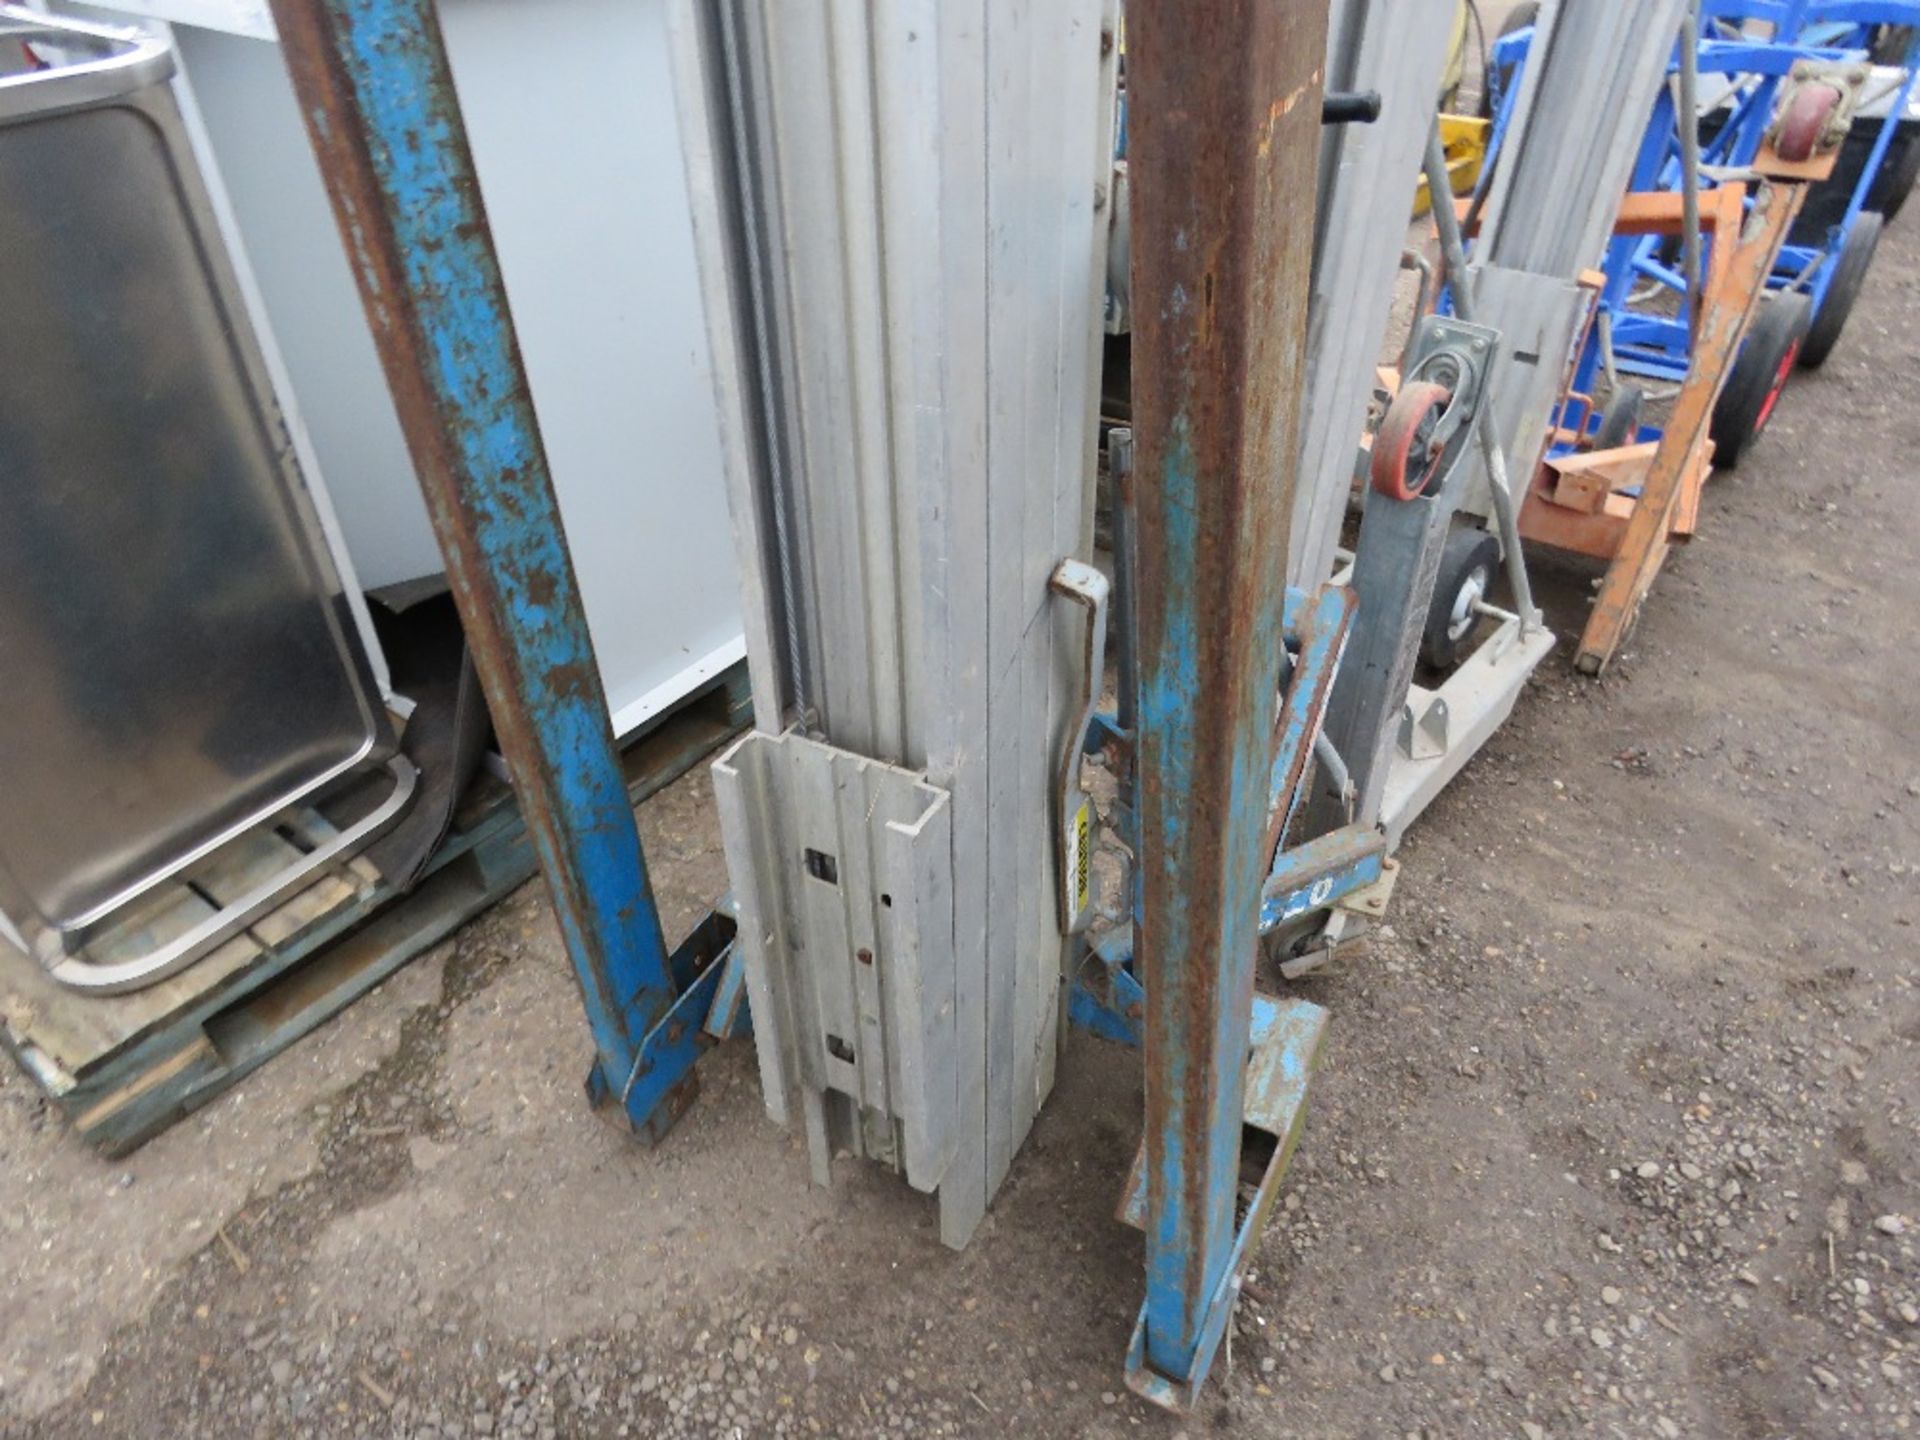 GENIE SL20 MANUAL OPERATED MATERIAL LIFT UNIT. WITH FORKS. DIRECT FROM LOCAL COMPANY. - Image 4 of 5